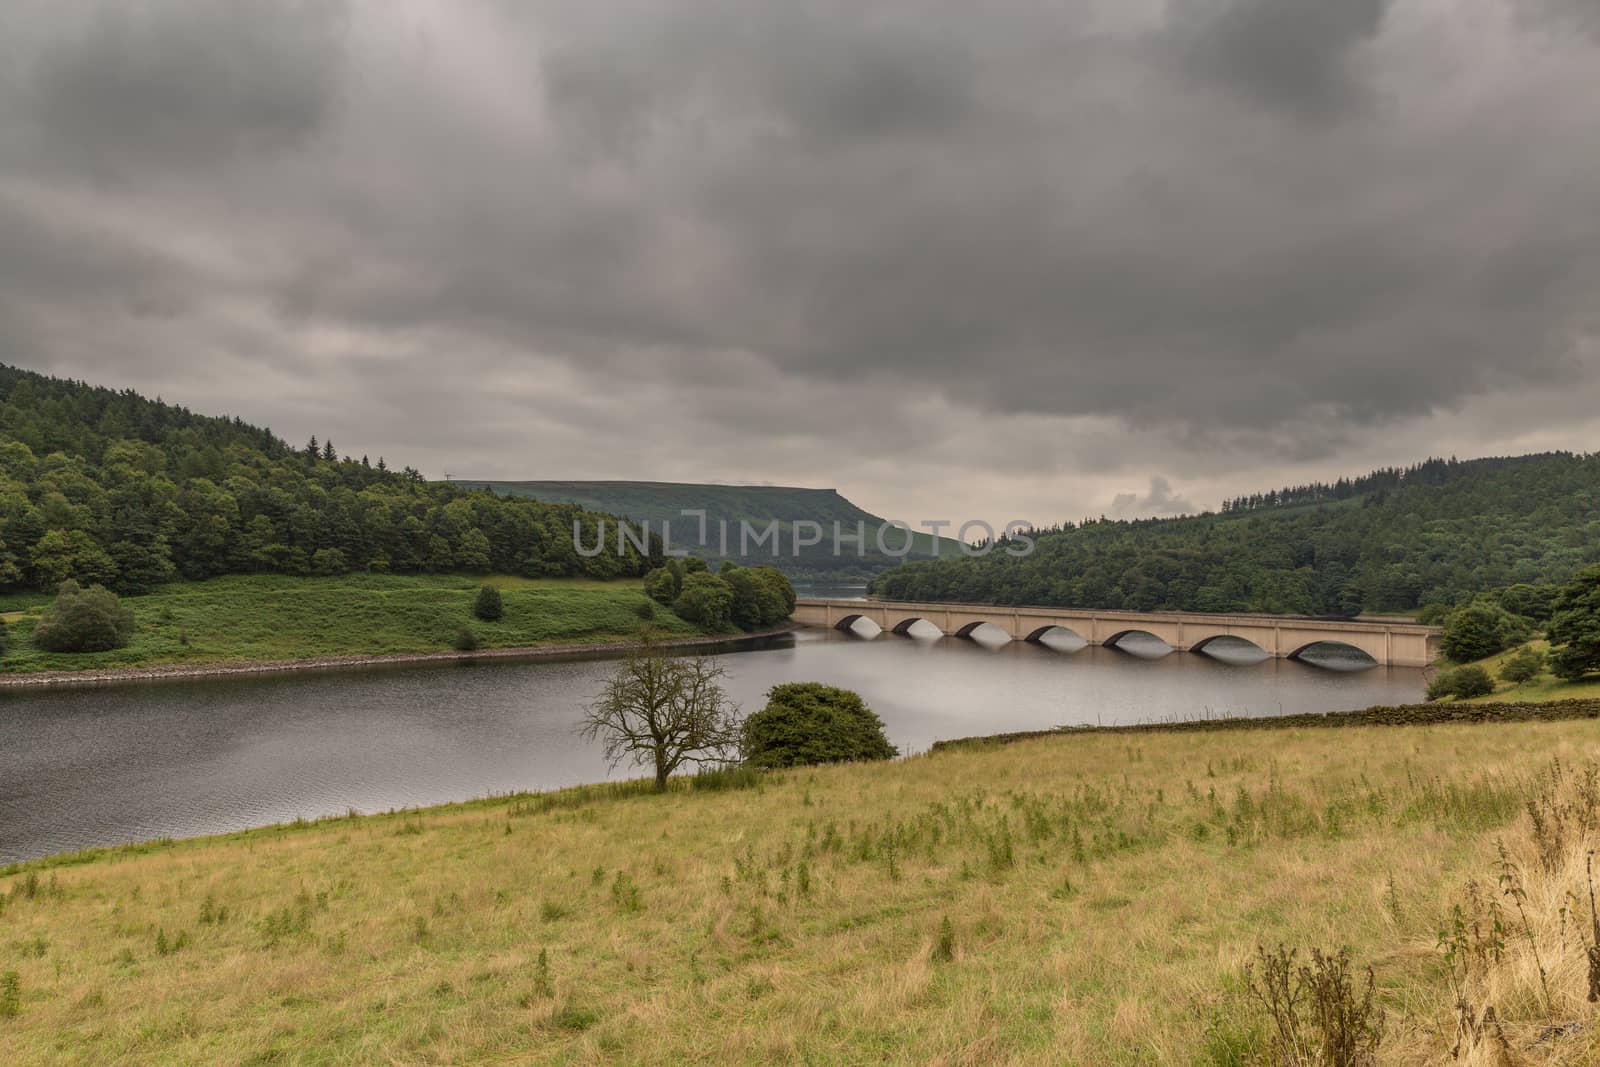 Ladybower Reservoir in the Peak District, England, with the Ashopton Viaduct crossing